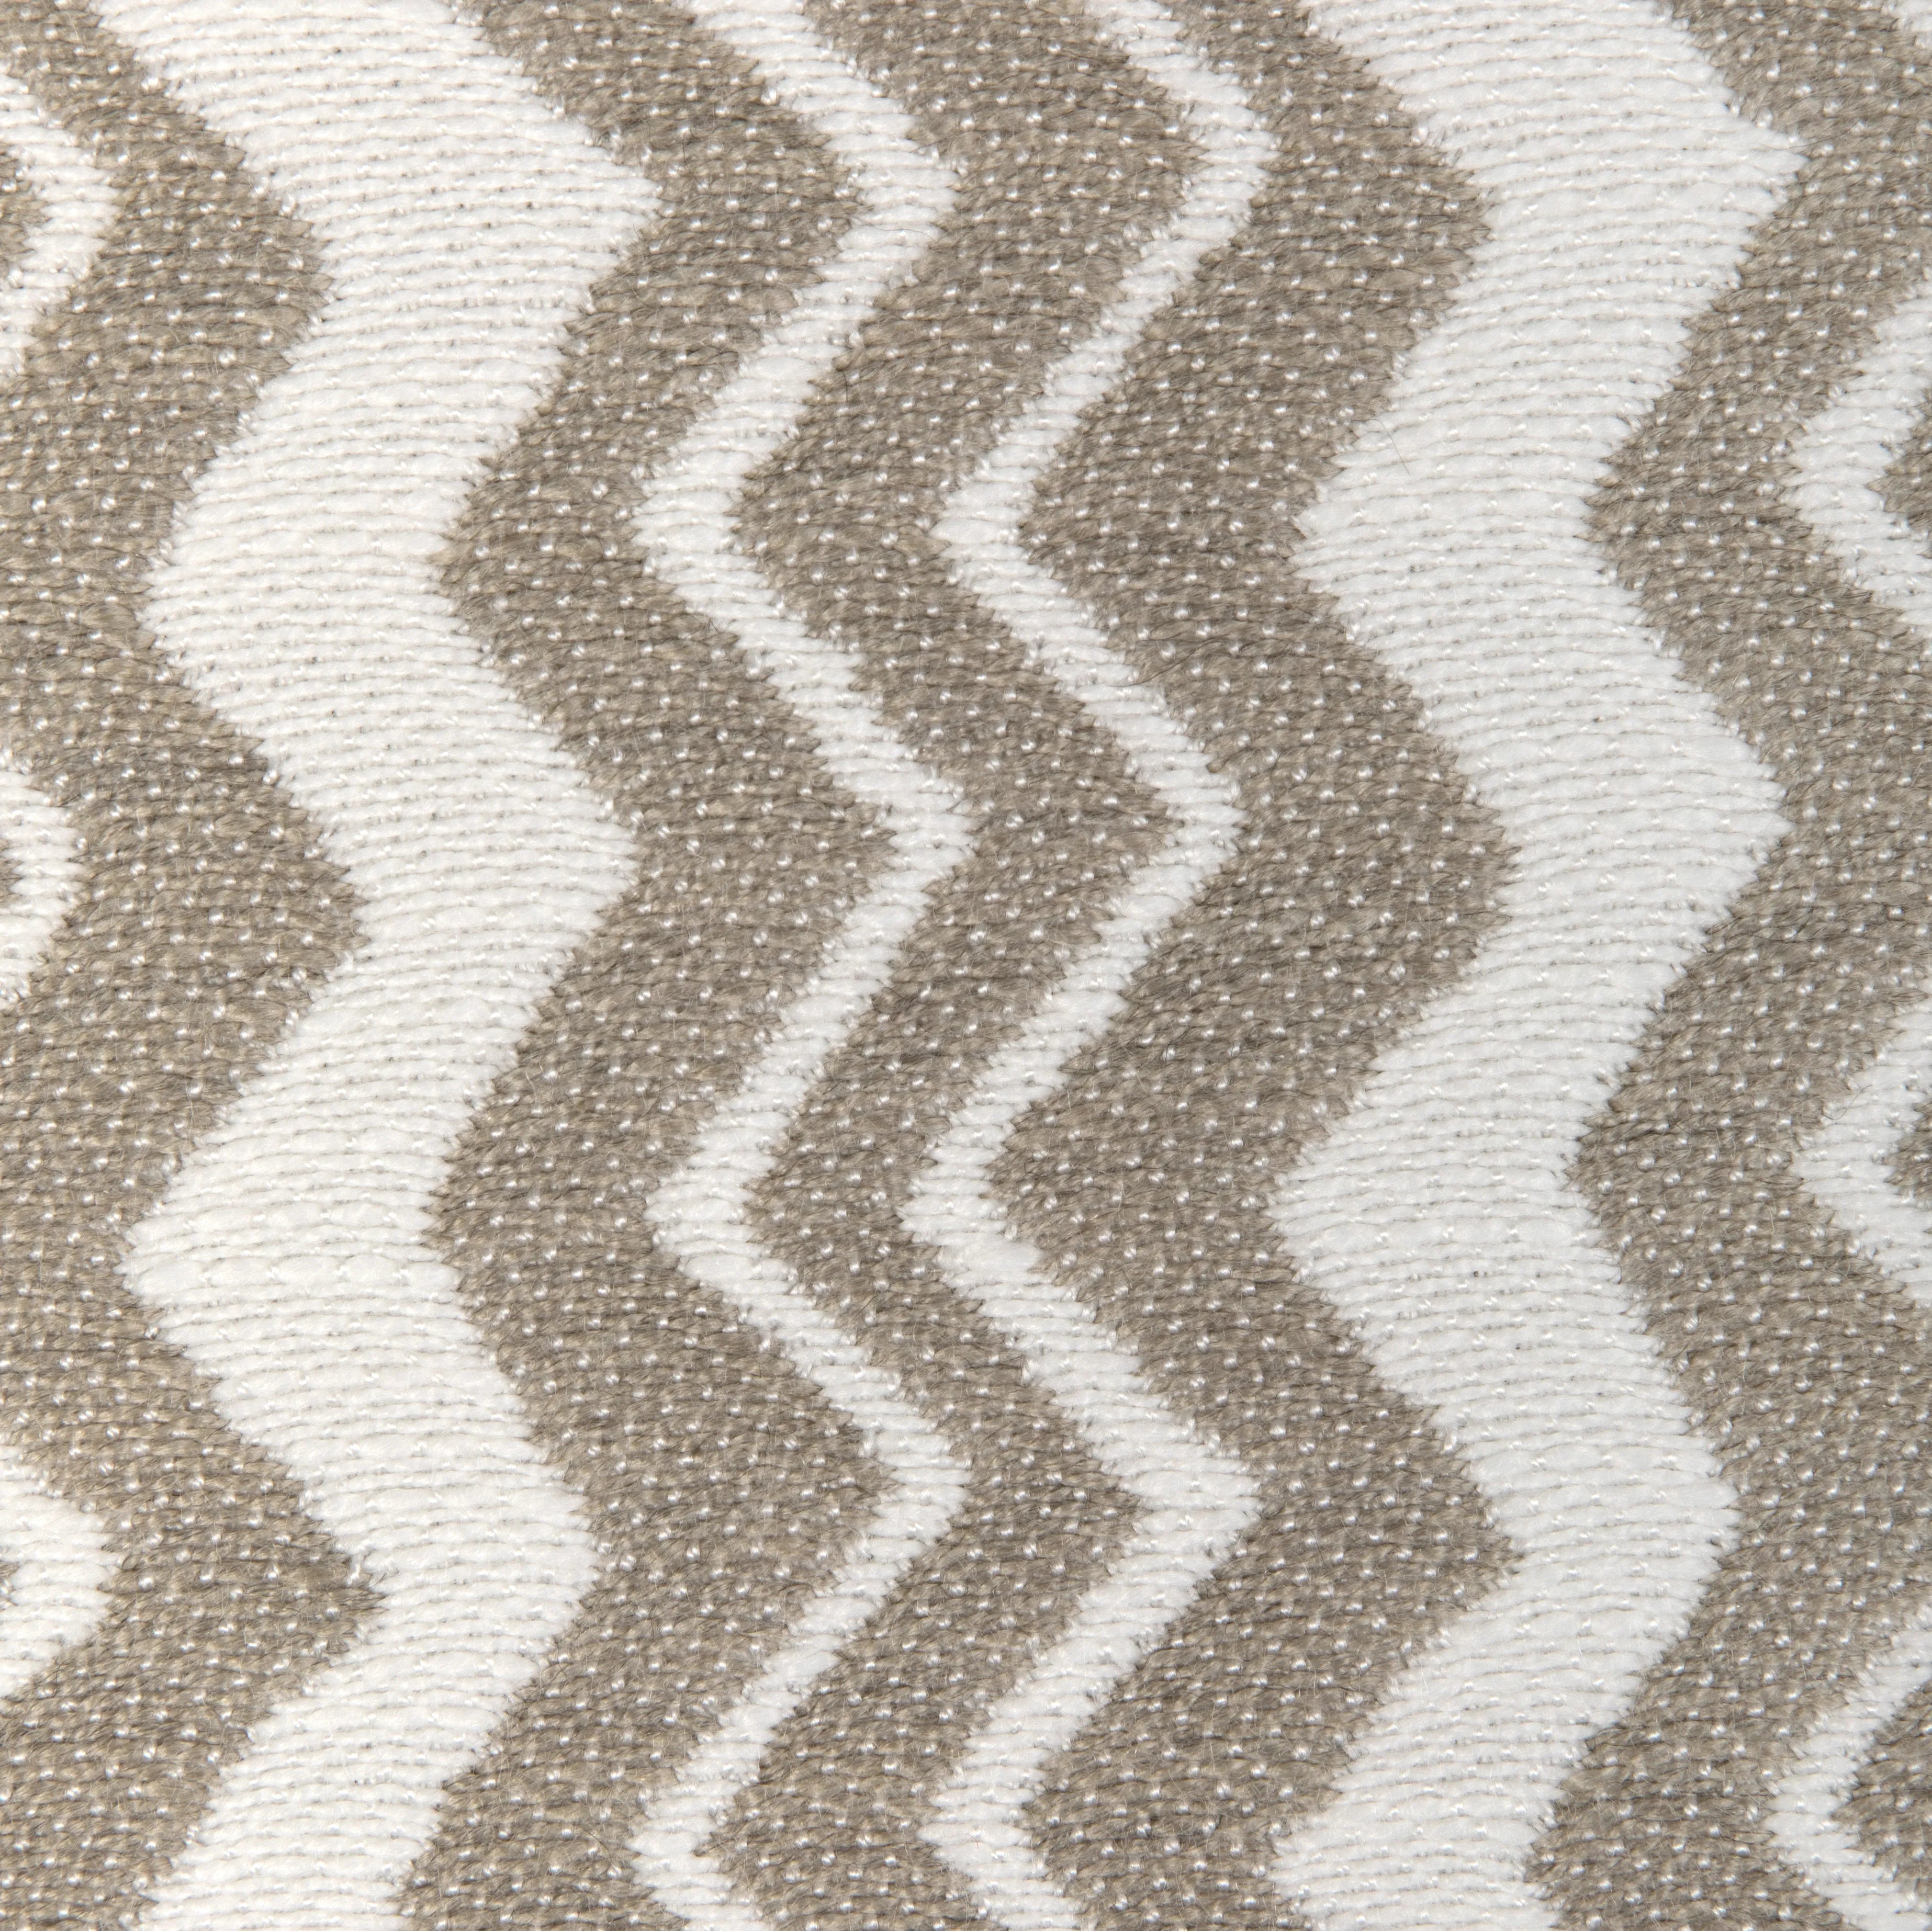 Closeup detail of Matipi fabric in sand color - pattern 36925.16.0 - by Kravet Couture in the Riviera collection